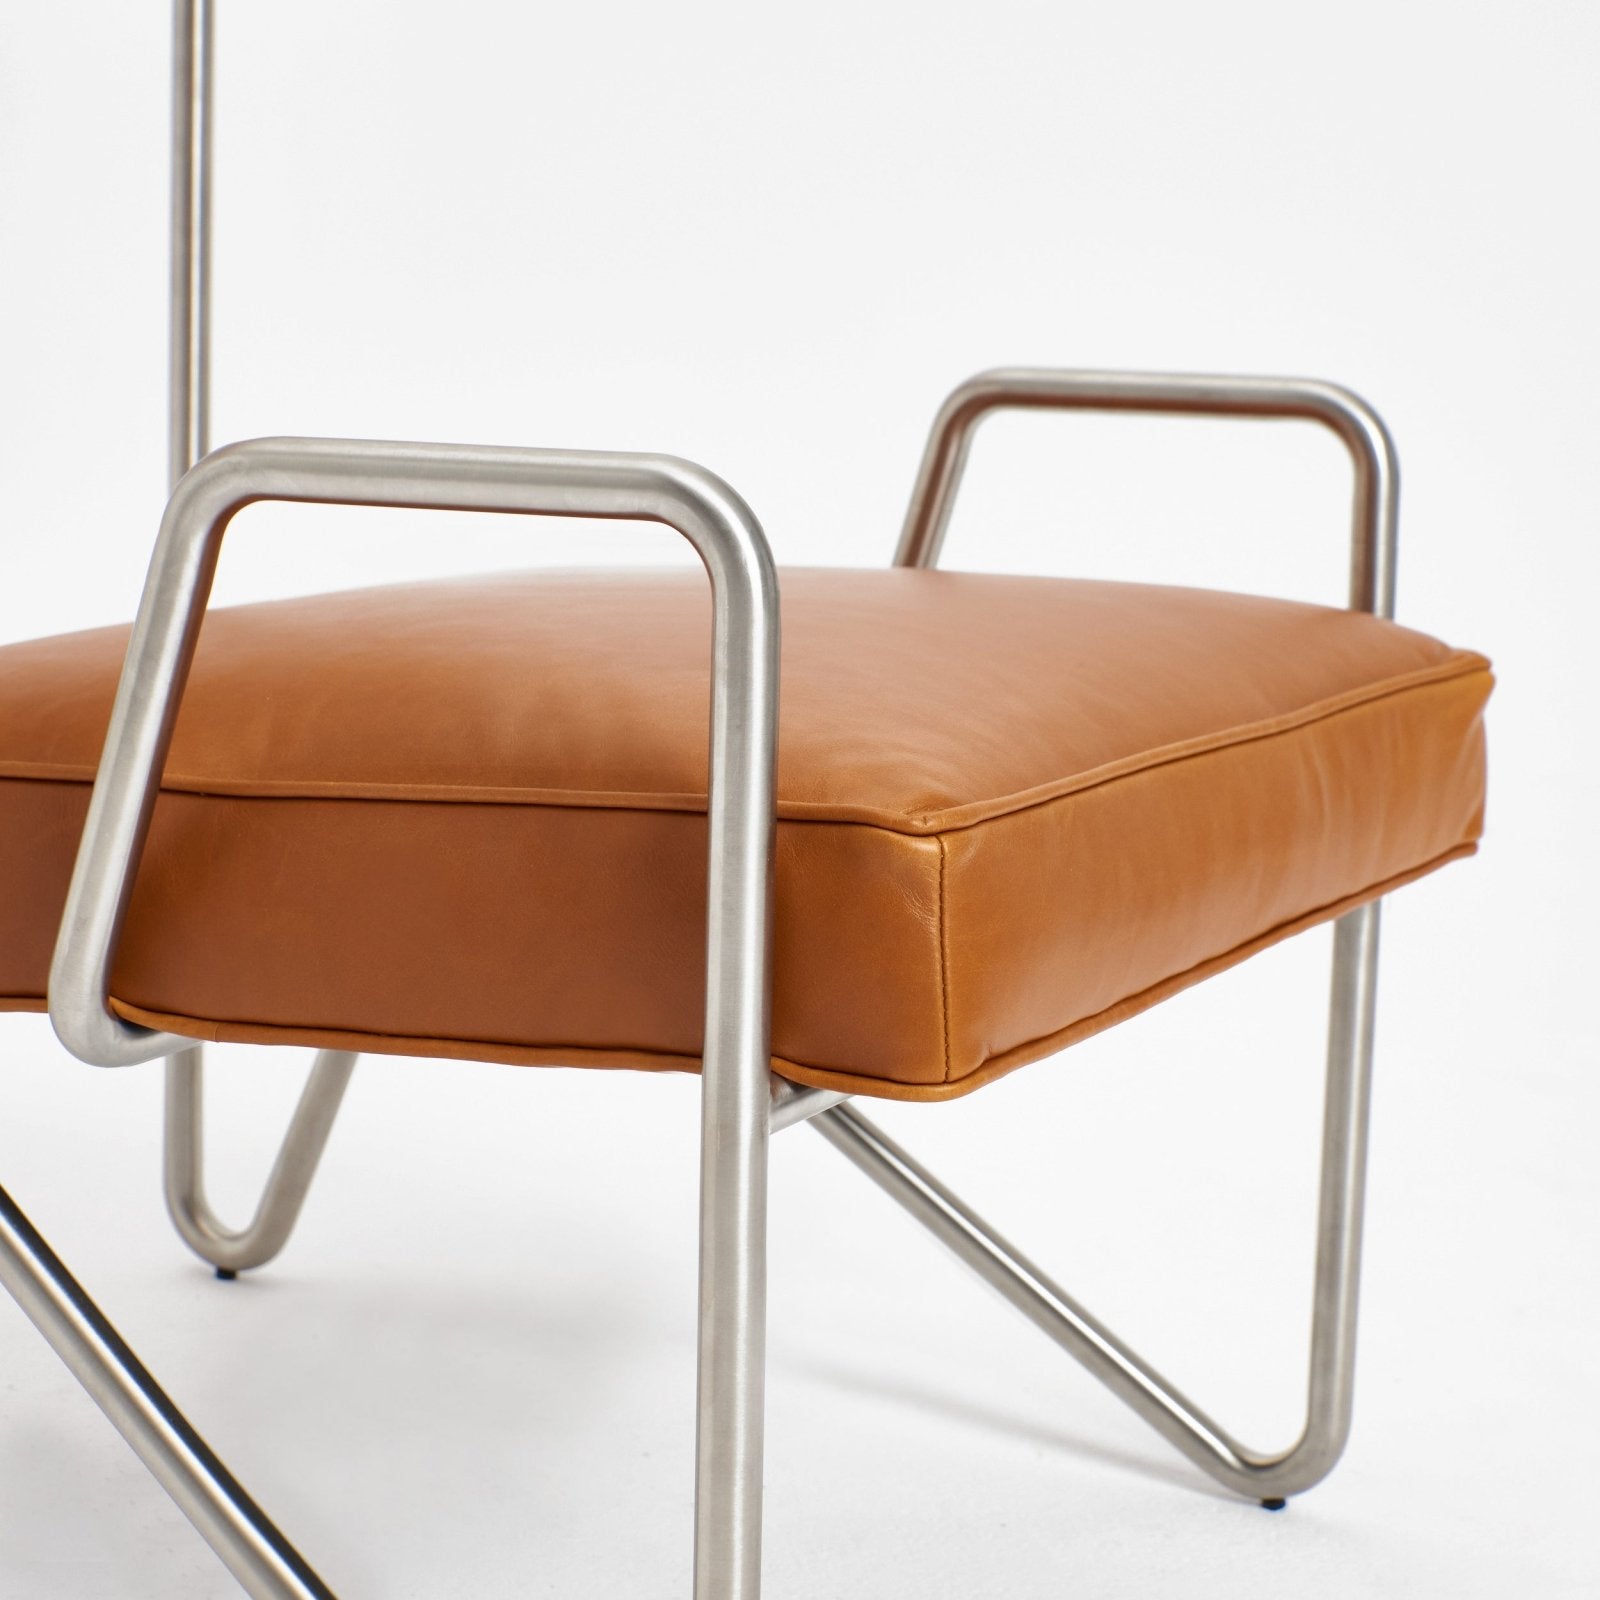 Larry's Lounge Chair - Brown/Chrome Seating by Project 213A